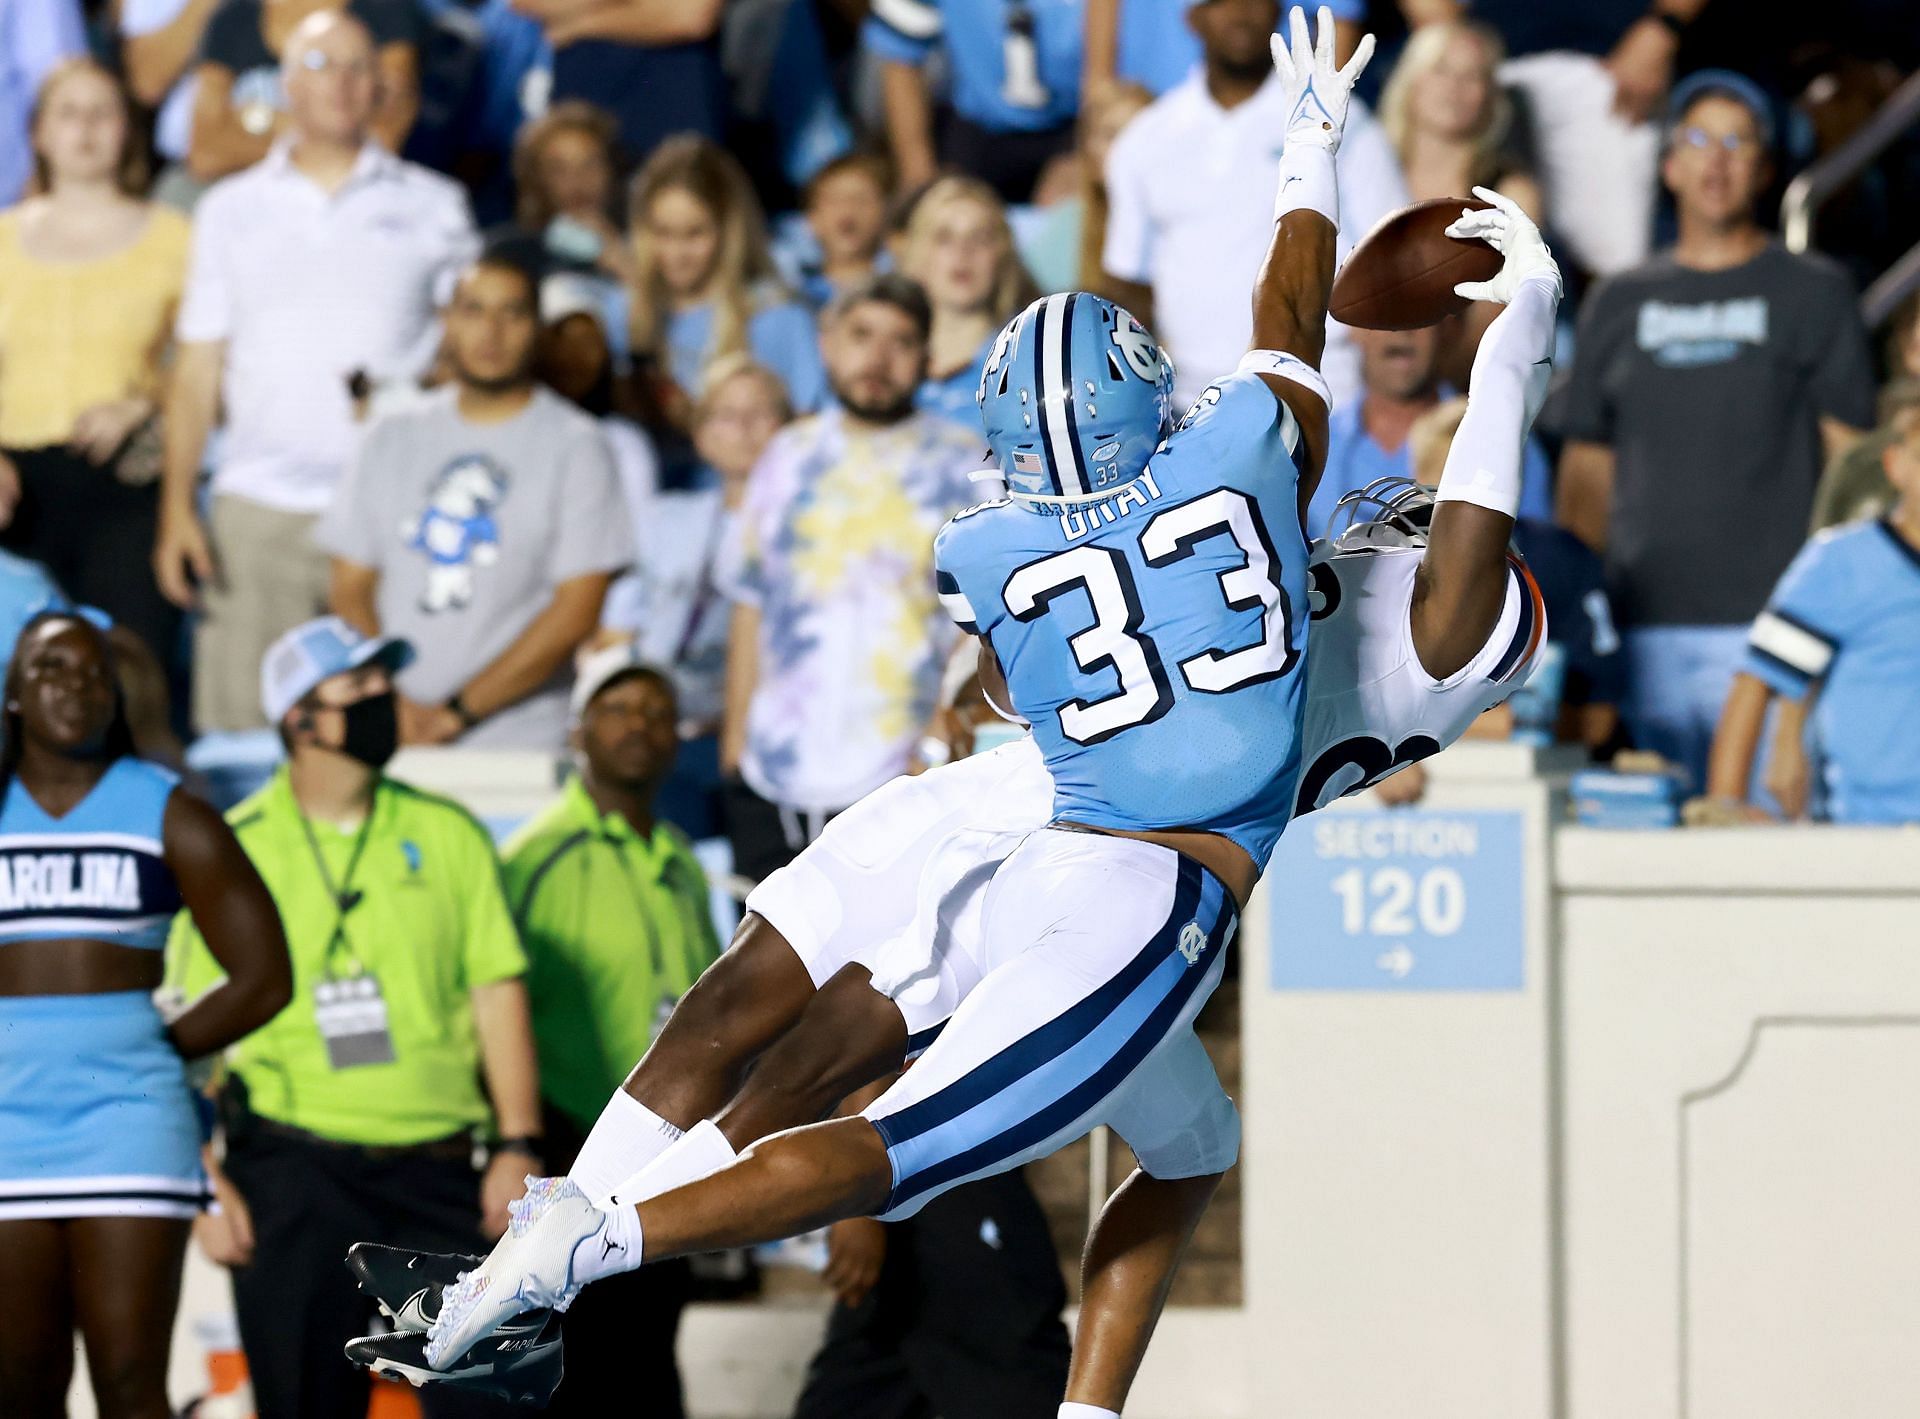 Cedric Gray #33 of the North Carolina Tar Heels defends a pass to Malachi Fields #86 of the Virginia Cavaliers